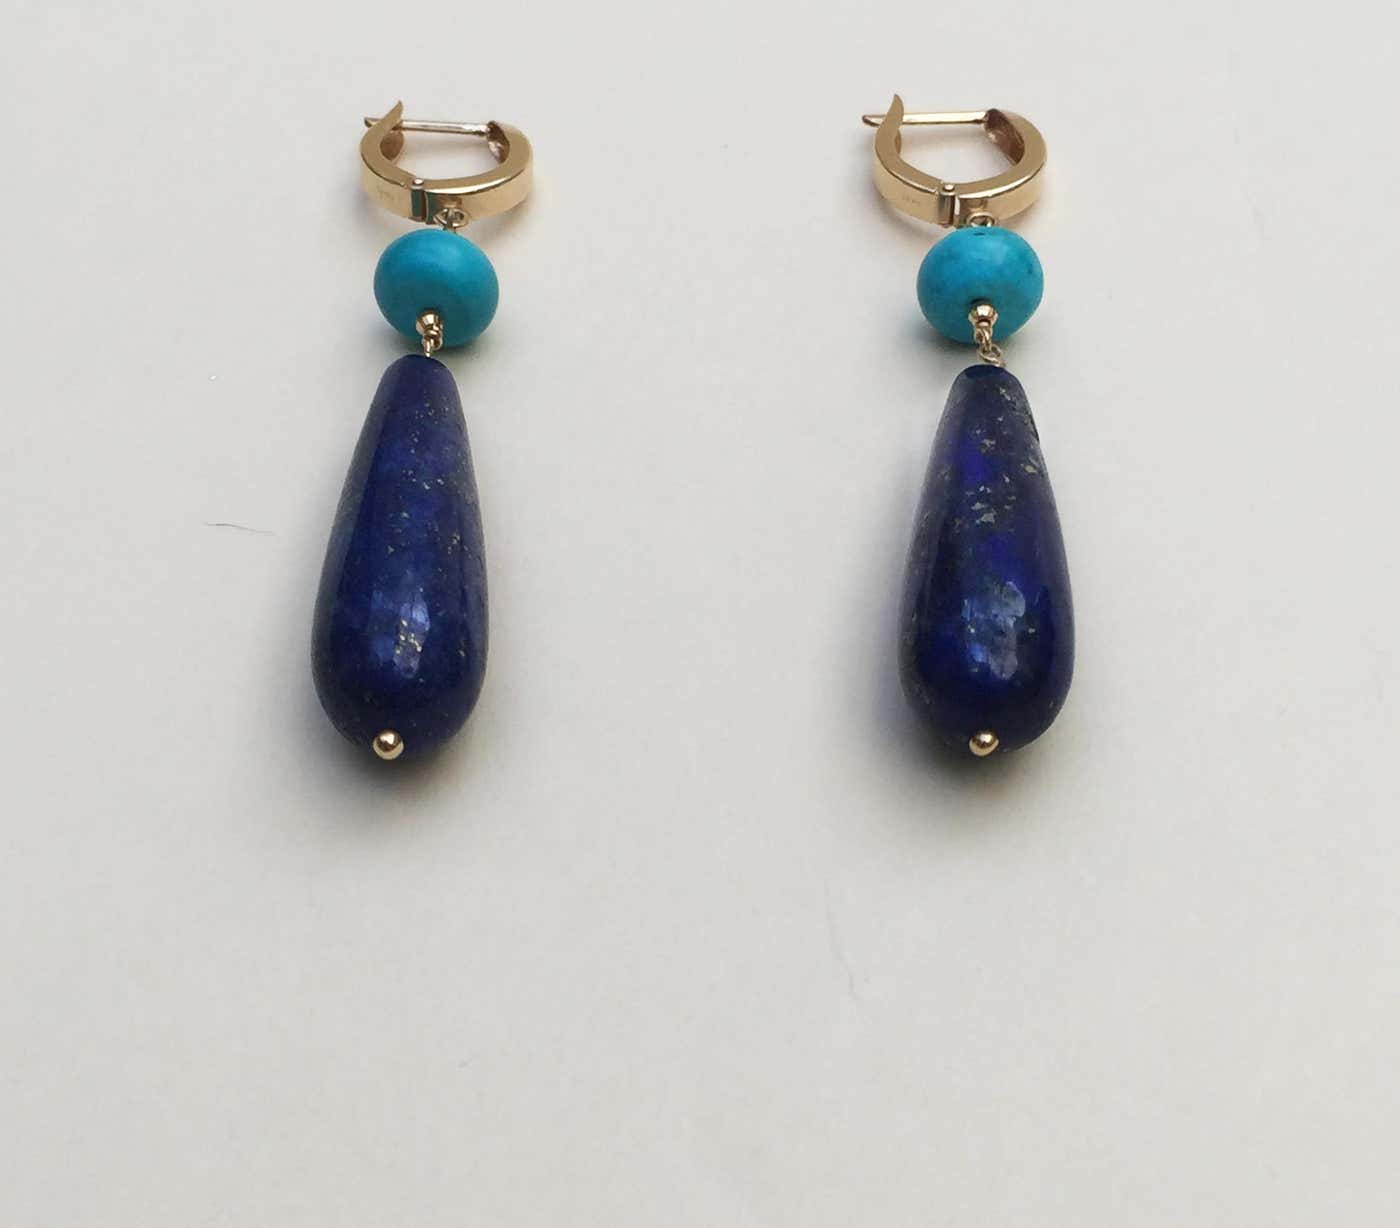 Lapis Lazuli and Turquoise Earrings with 14K Yellow Gold